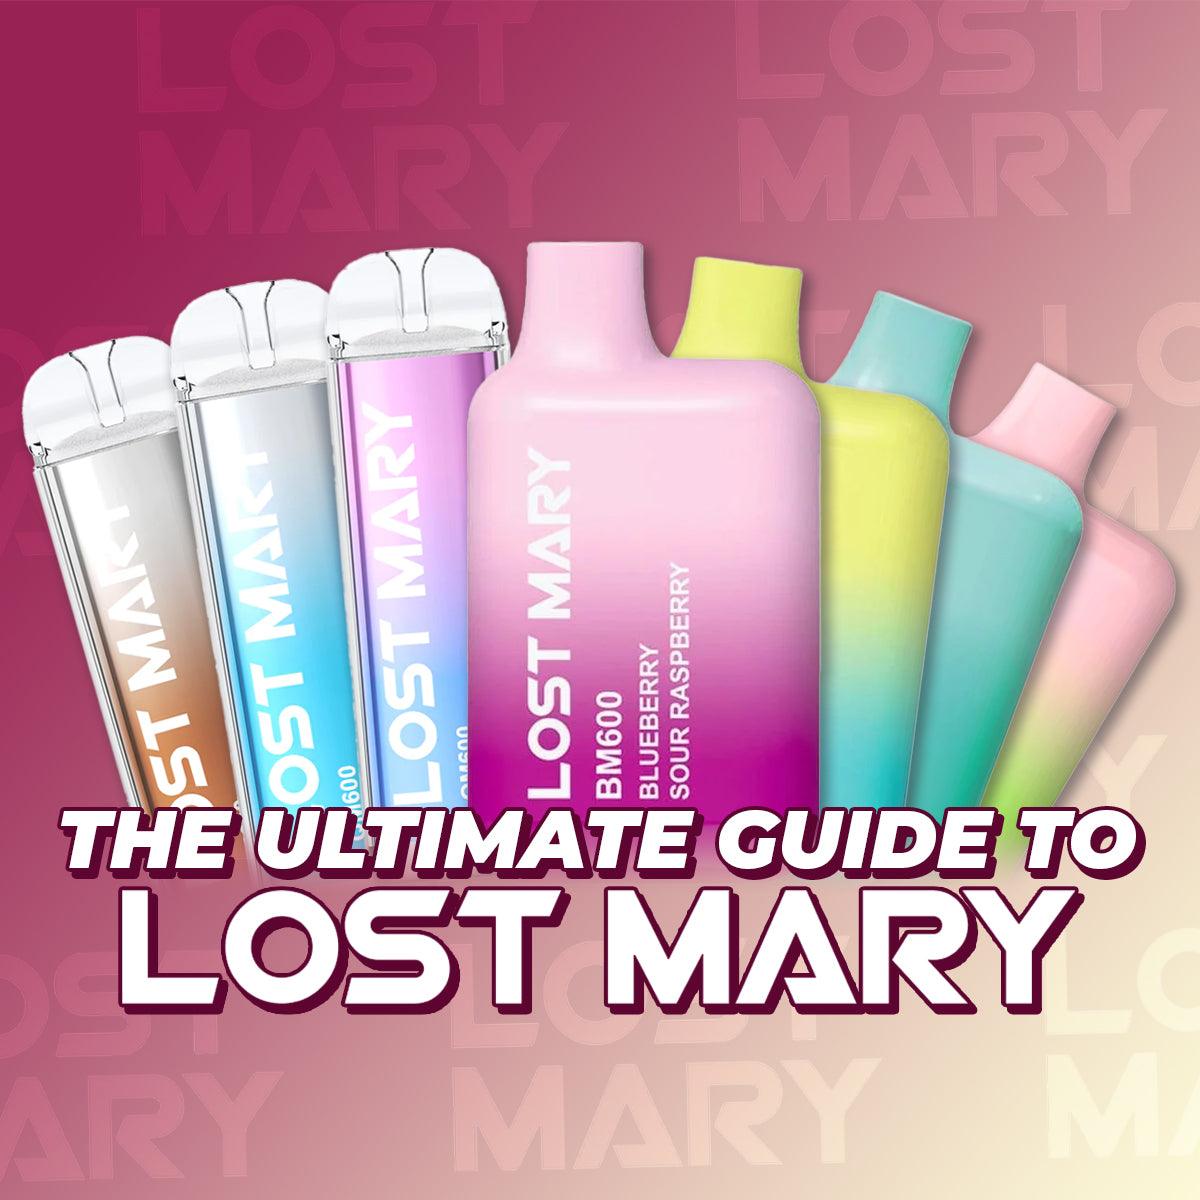 Exploring Lost Mary: A Complete Guide to Lost Mary Vape